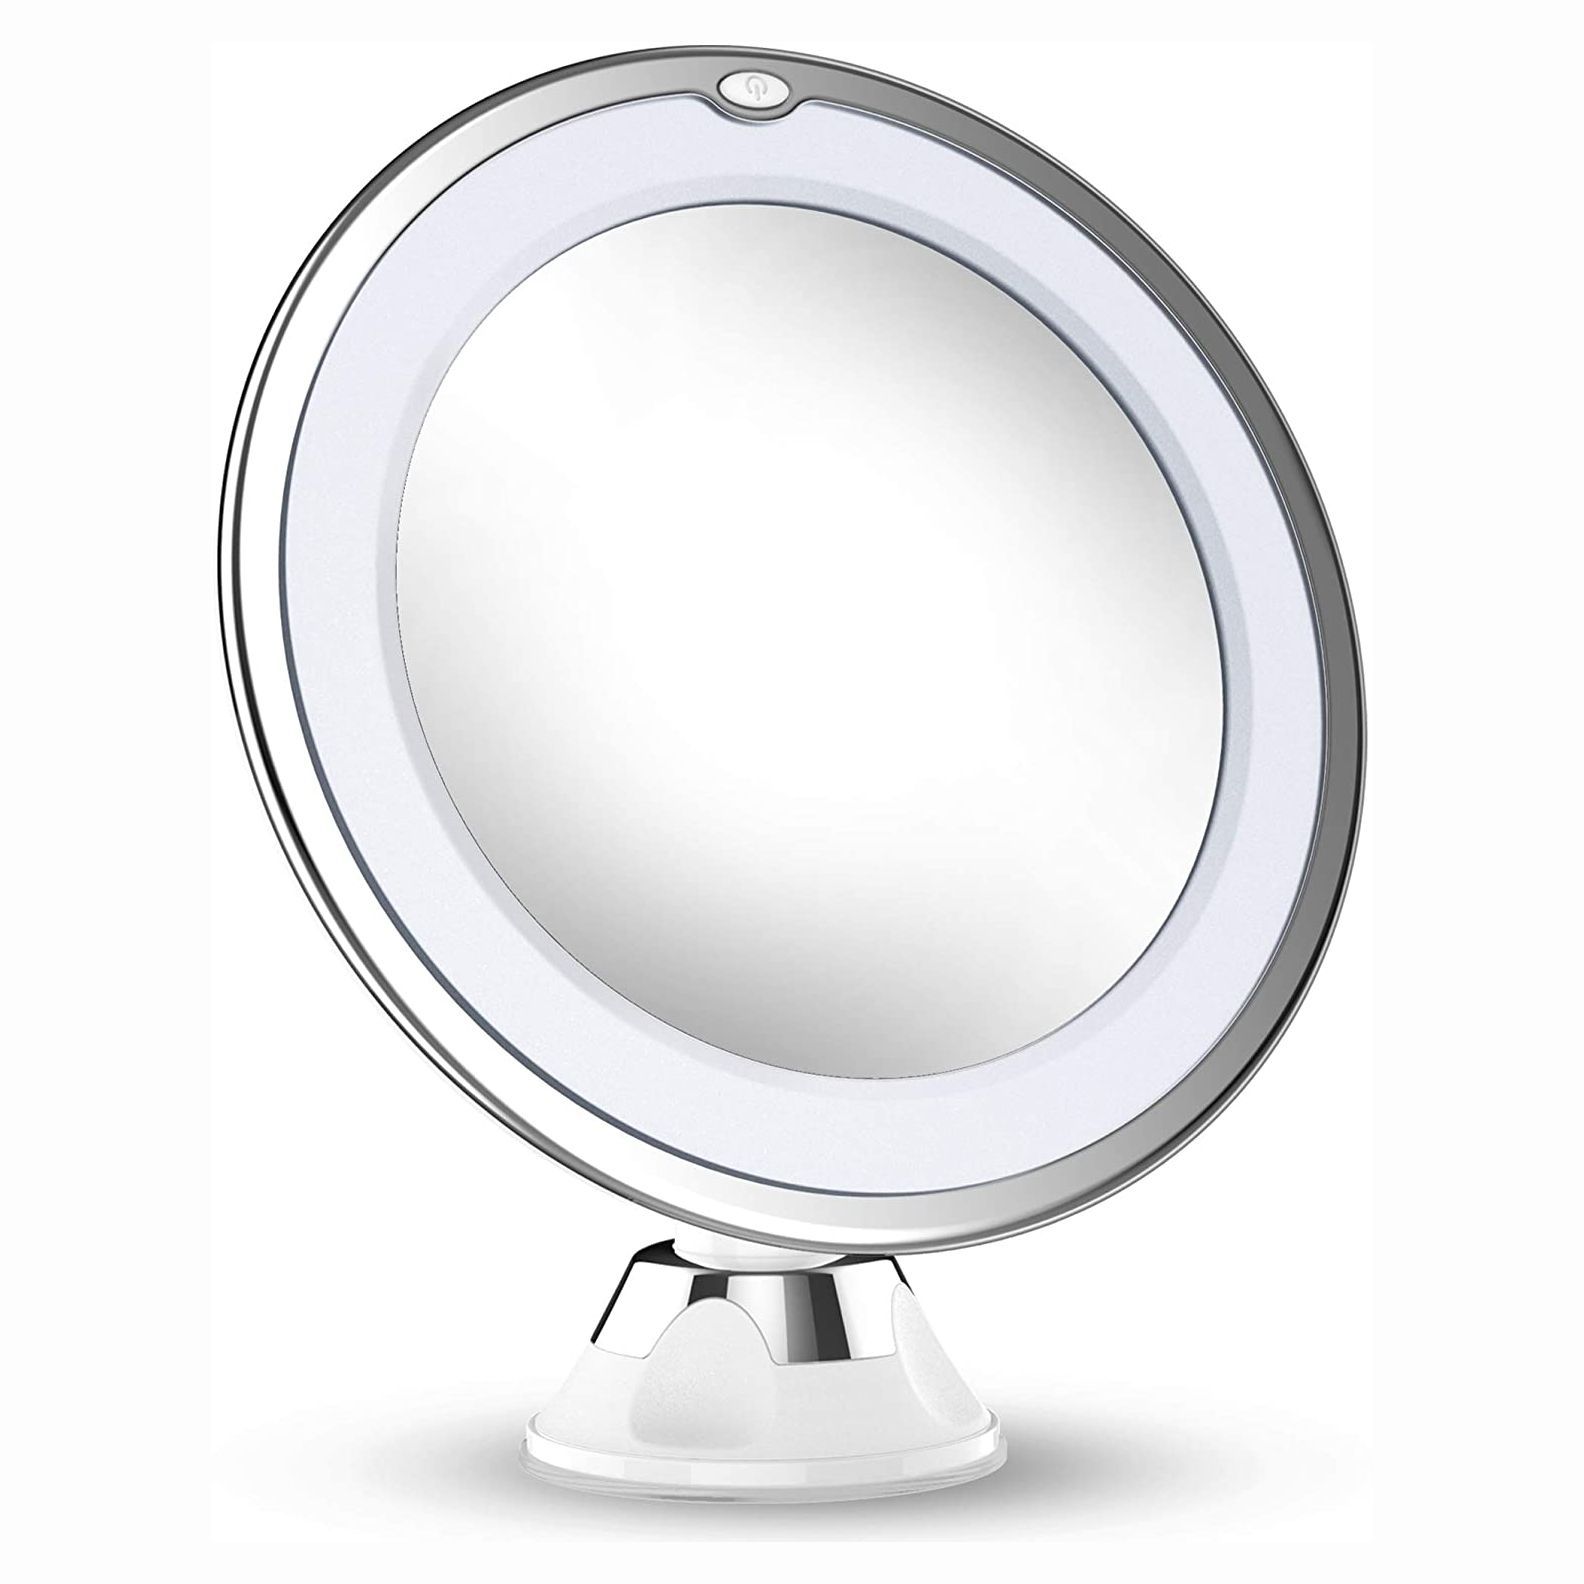 Gianic 10X Magnifying Makeup Mirror LED Lighted Travel Vanity Mirror 3 Color Dimmable Makeuo Mirror with Suction Cup 360 Rotation Portable Illuminated Mirror for Bathroom/Countertop 